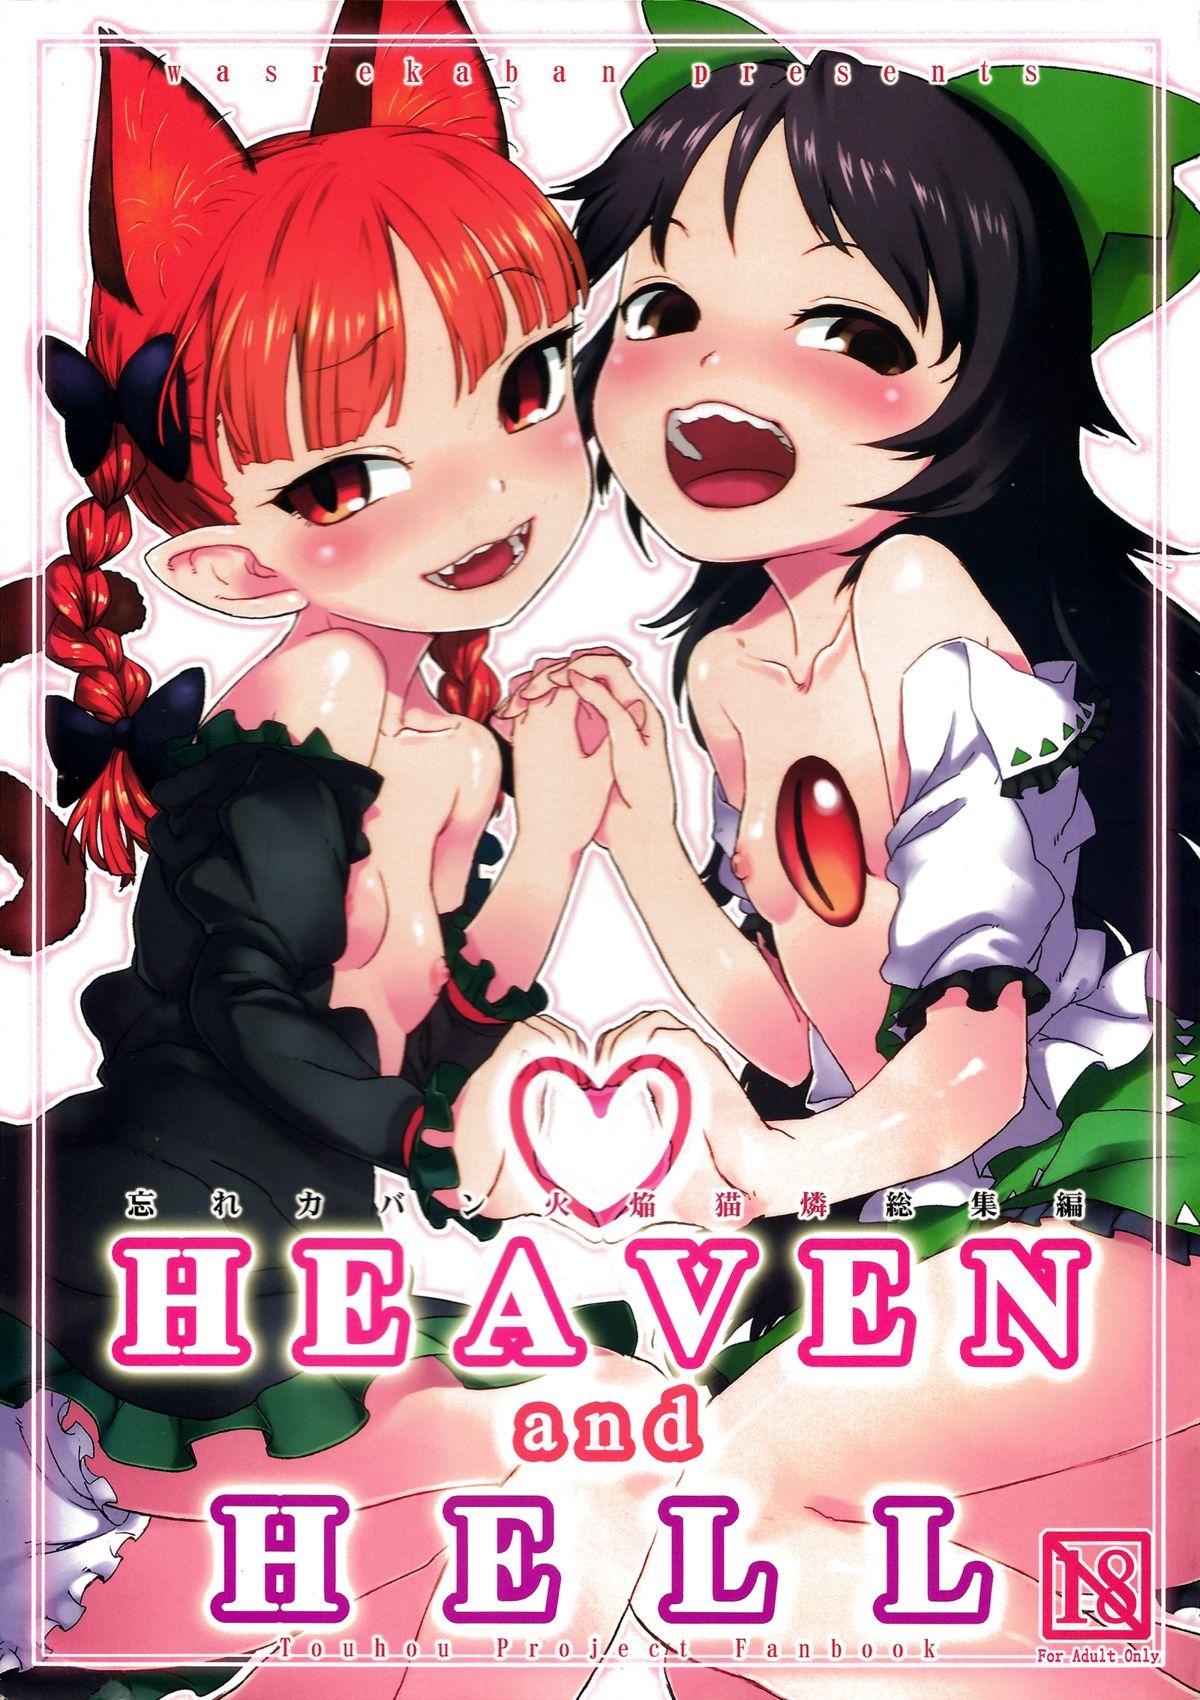 Cdmx HEAVEN and HELL - Touhou project Pounding - Picture 1